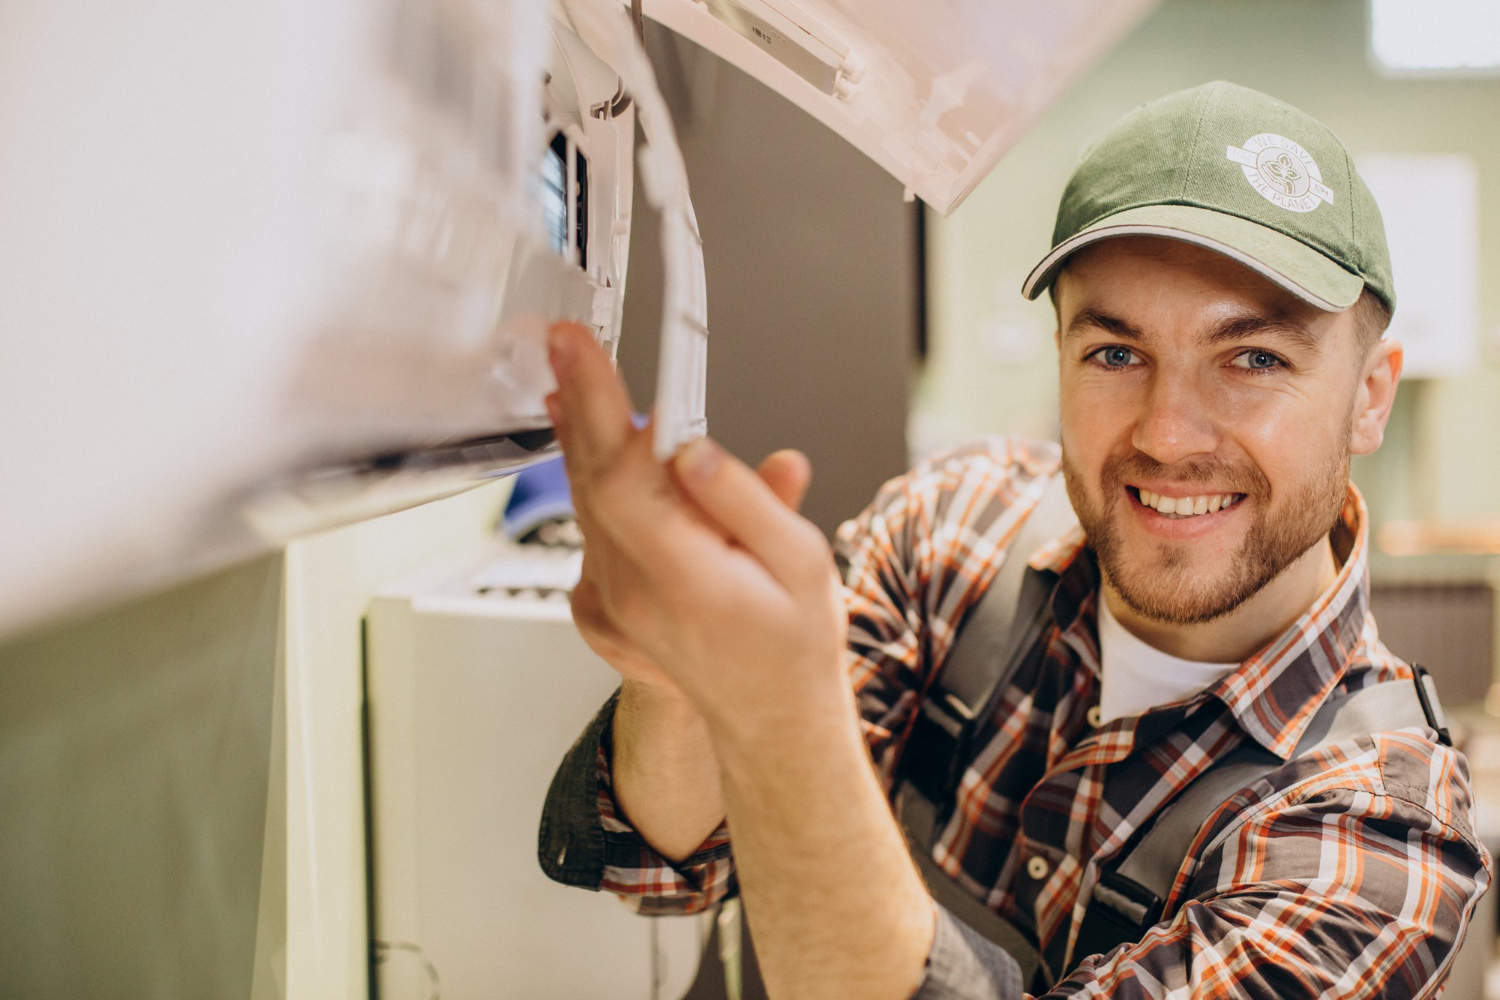 An HVAC technician works on an air conditioning using. He's wearing a brown, white, and orange plaid long-sleeve shirt and an olive green hat, and is smiling at the camera.